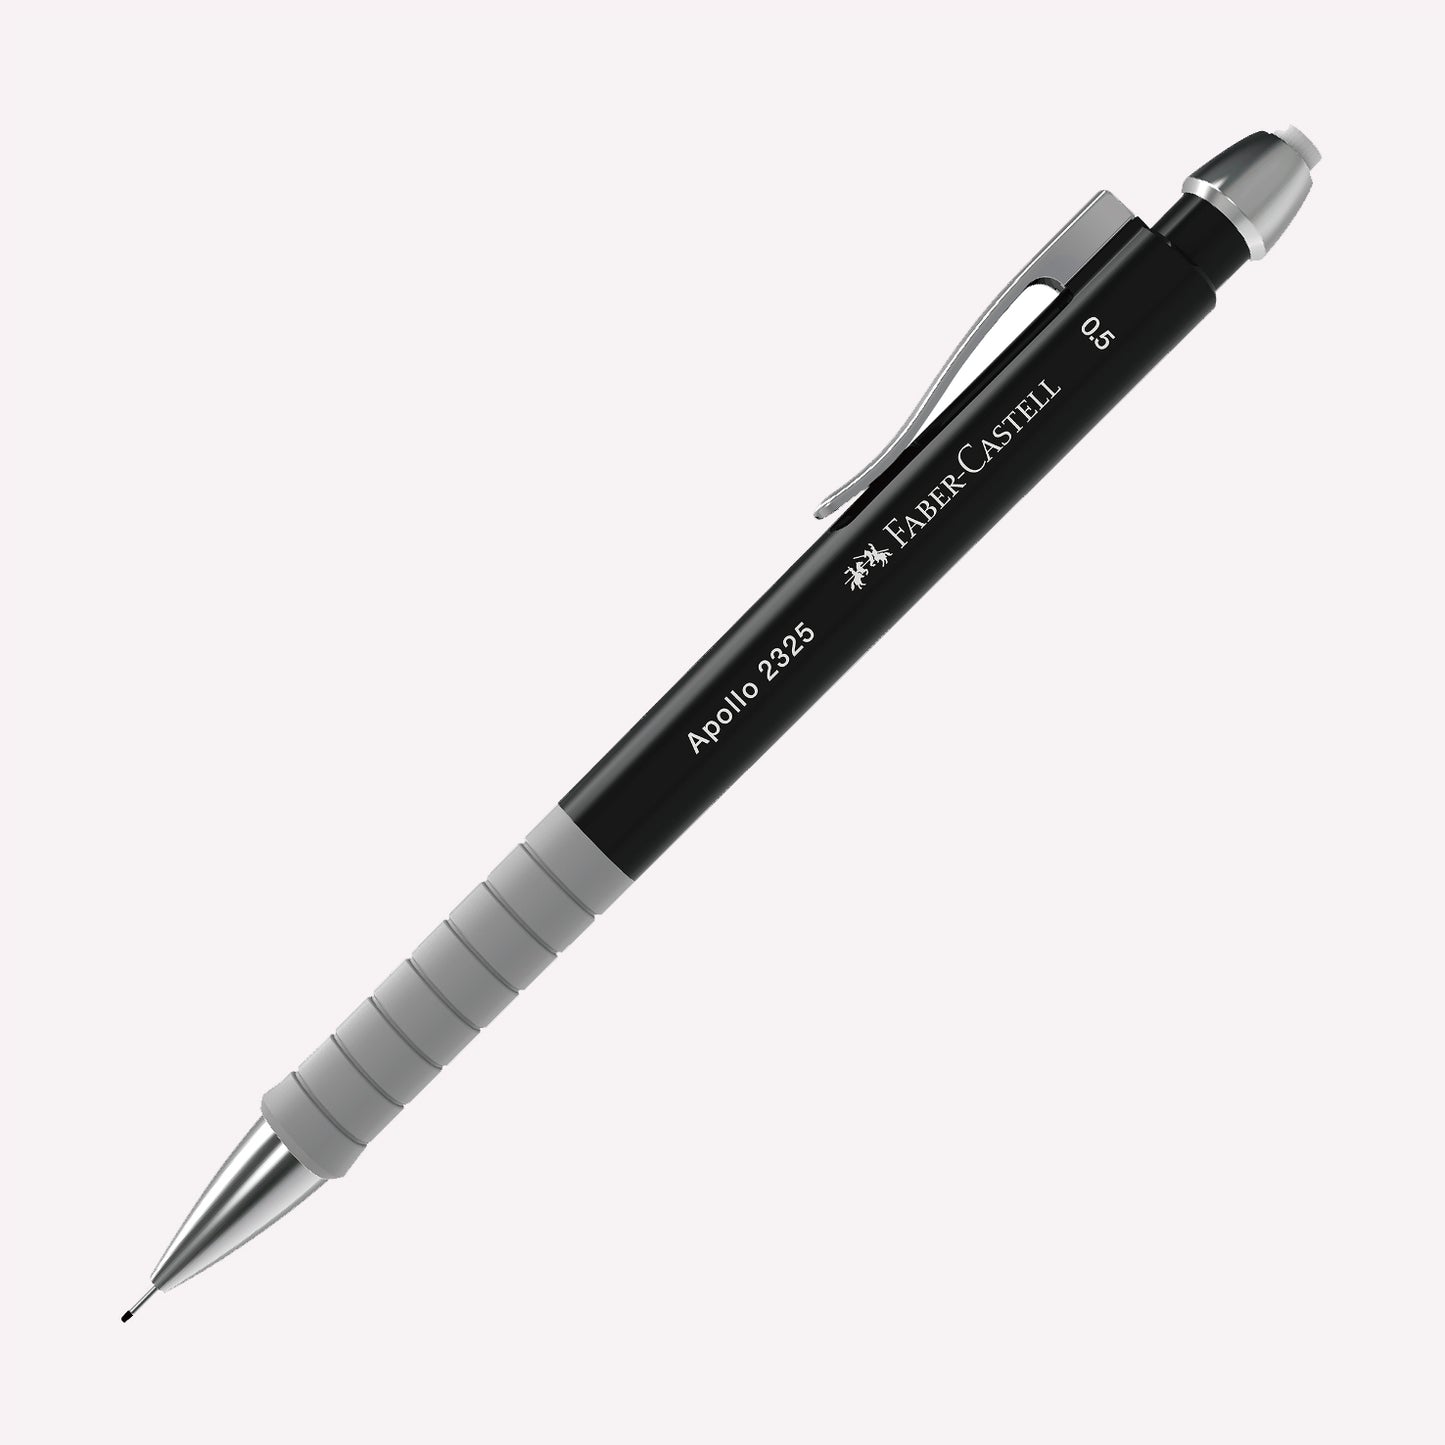 Faber-Castell Apollo 2325 0.5 Mechanical Pencil in black, with a coloured barrel and rubber grip area, topped with a small white eraser. 